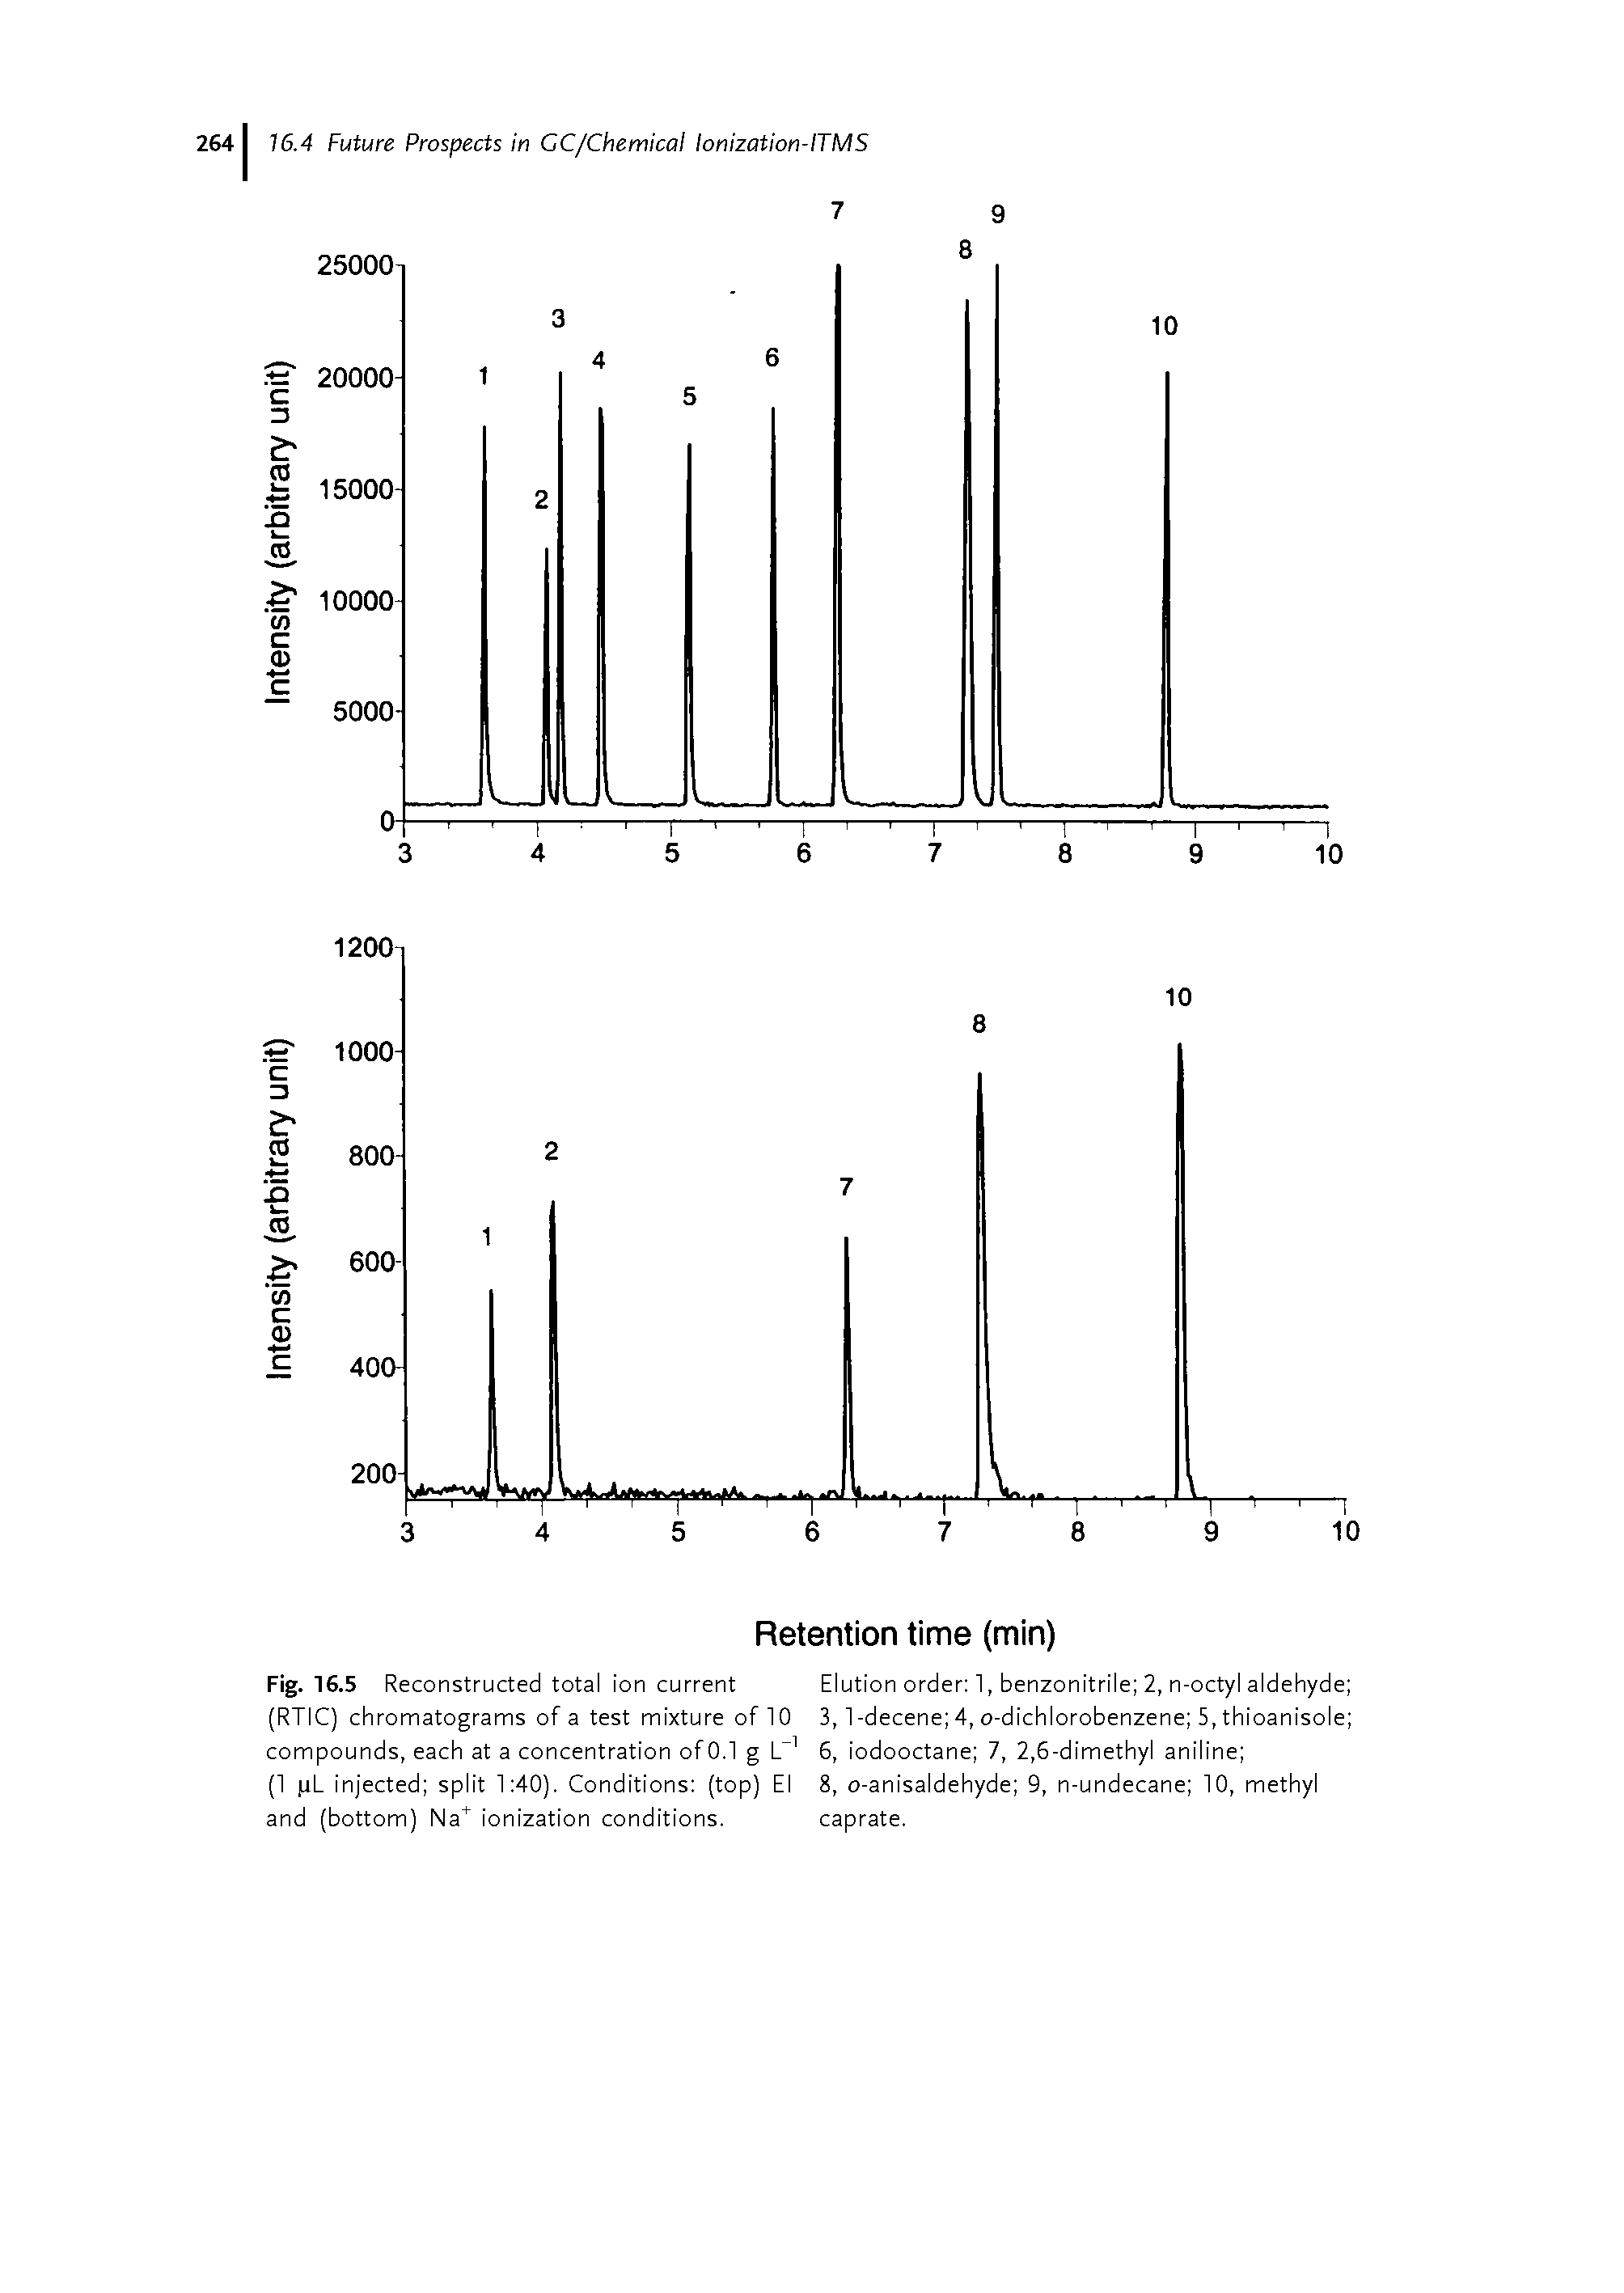 Fig. 16.5 Reconstructed total ion current (RTIC) chromatograms of a test mixture of 10 compounds, each at a concentration of 0.1 g (1 iL injected split 1 40). Conditions (top) El and (bottom) Na" ionization conditions.